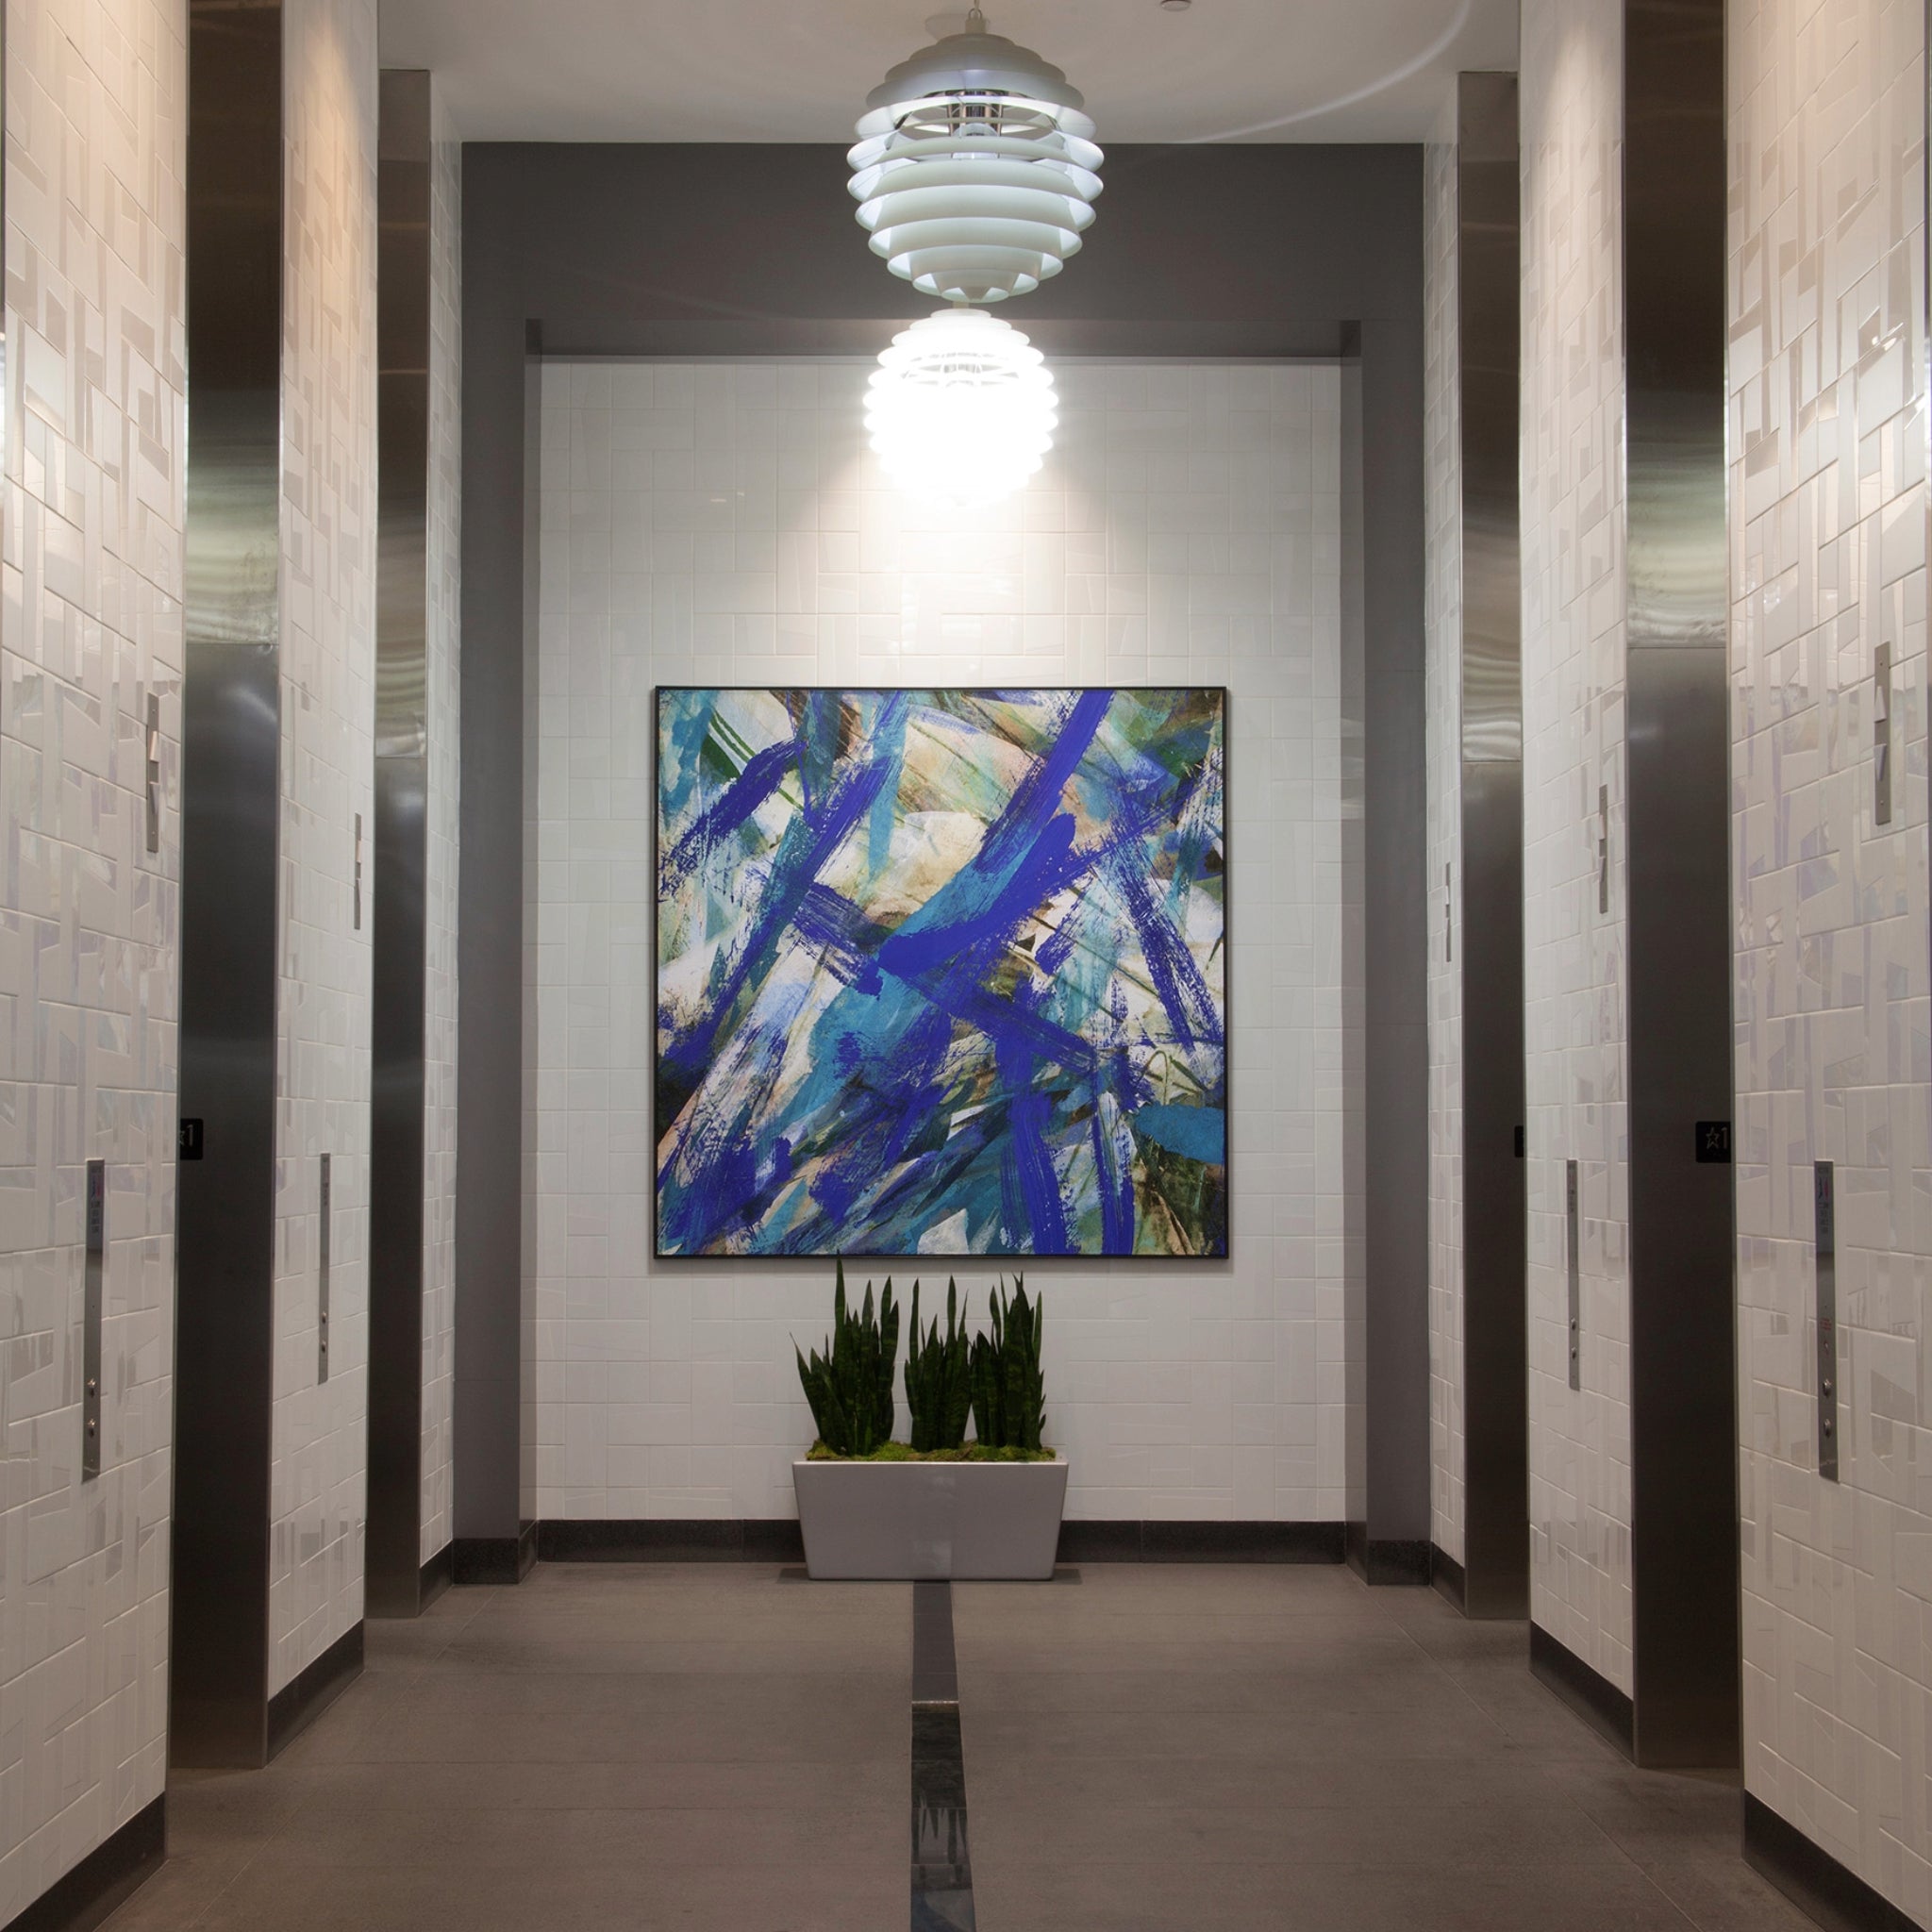 Elevator bank in office lobby enhanced by WRAPPED Studio's blue and violet abstract large-format canvas painting.